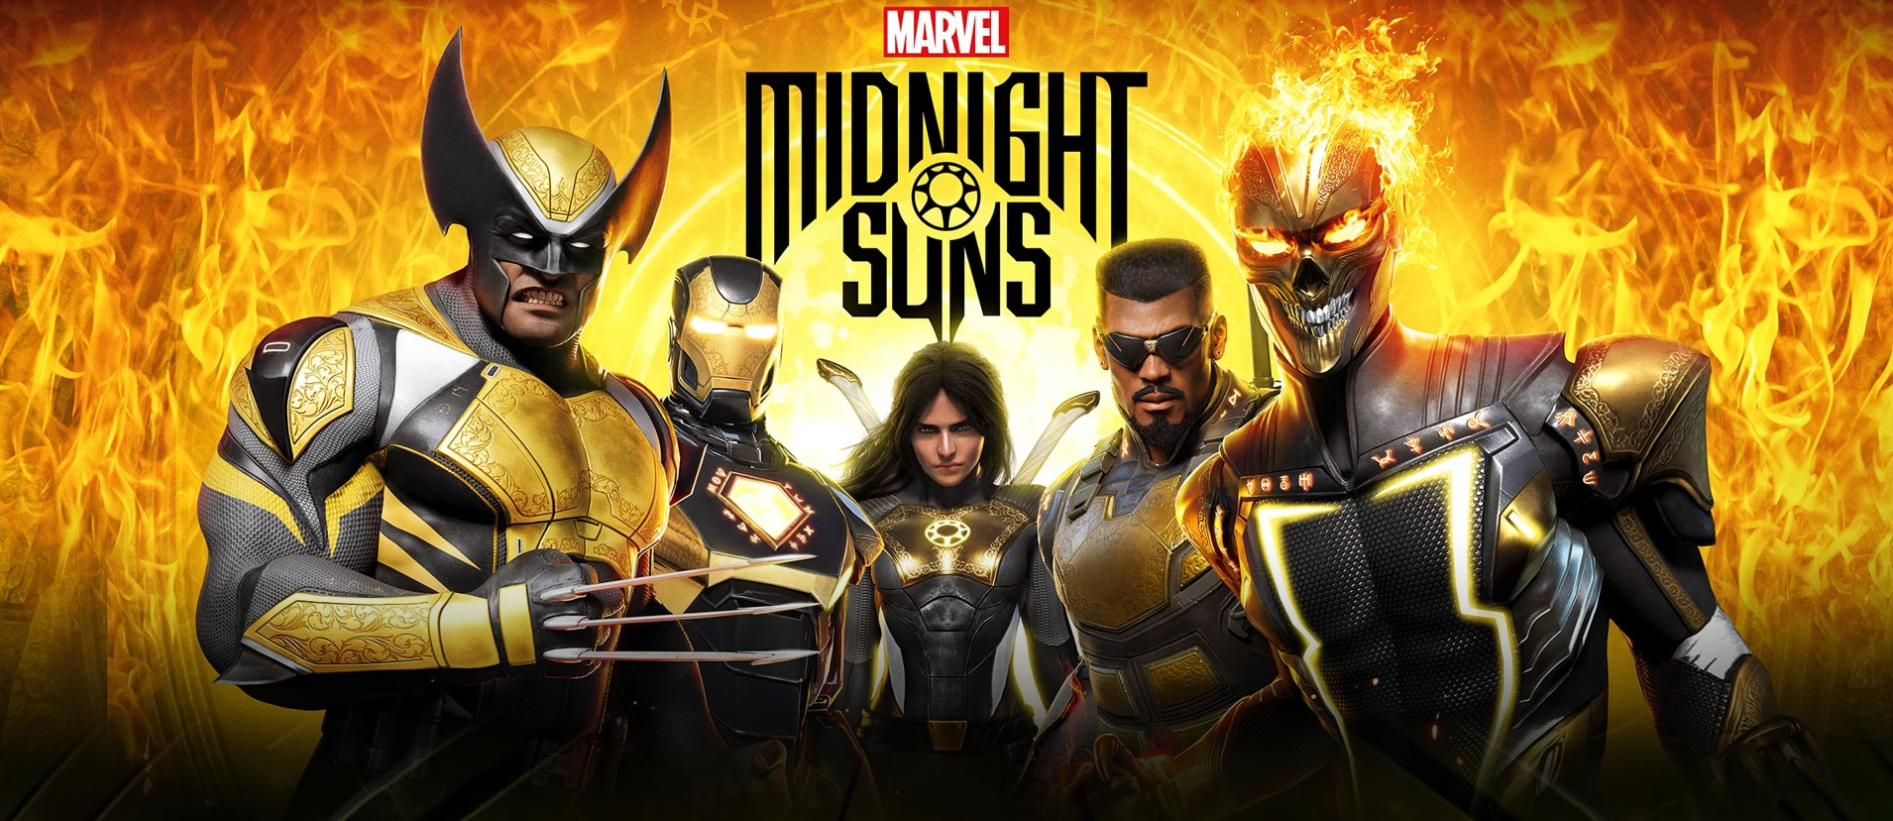 Midnight Suns promotional art featuring wolverine, iron man, blade, and ghost rider